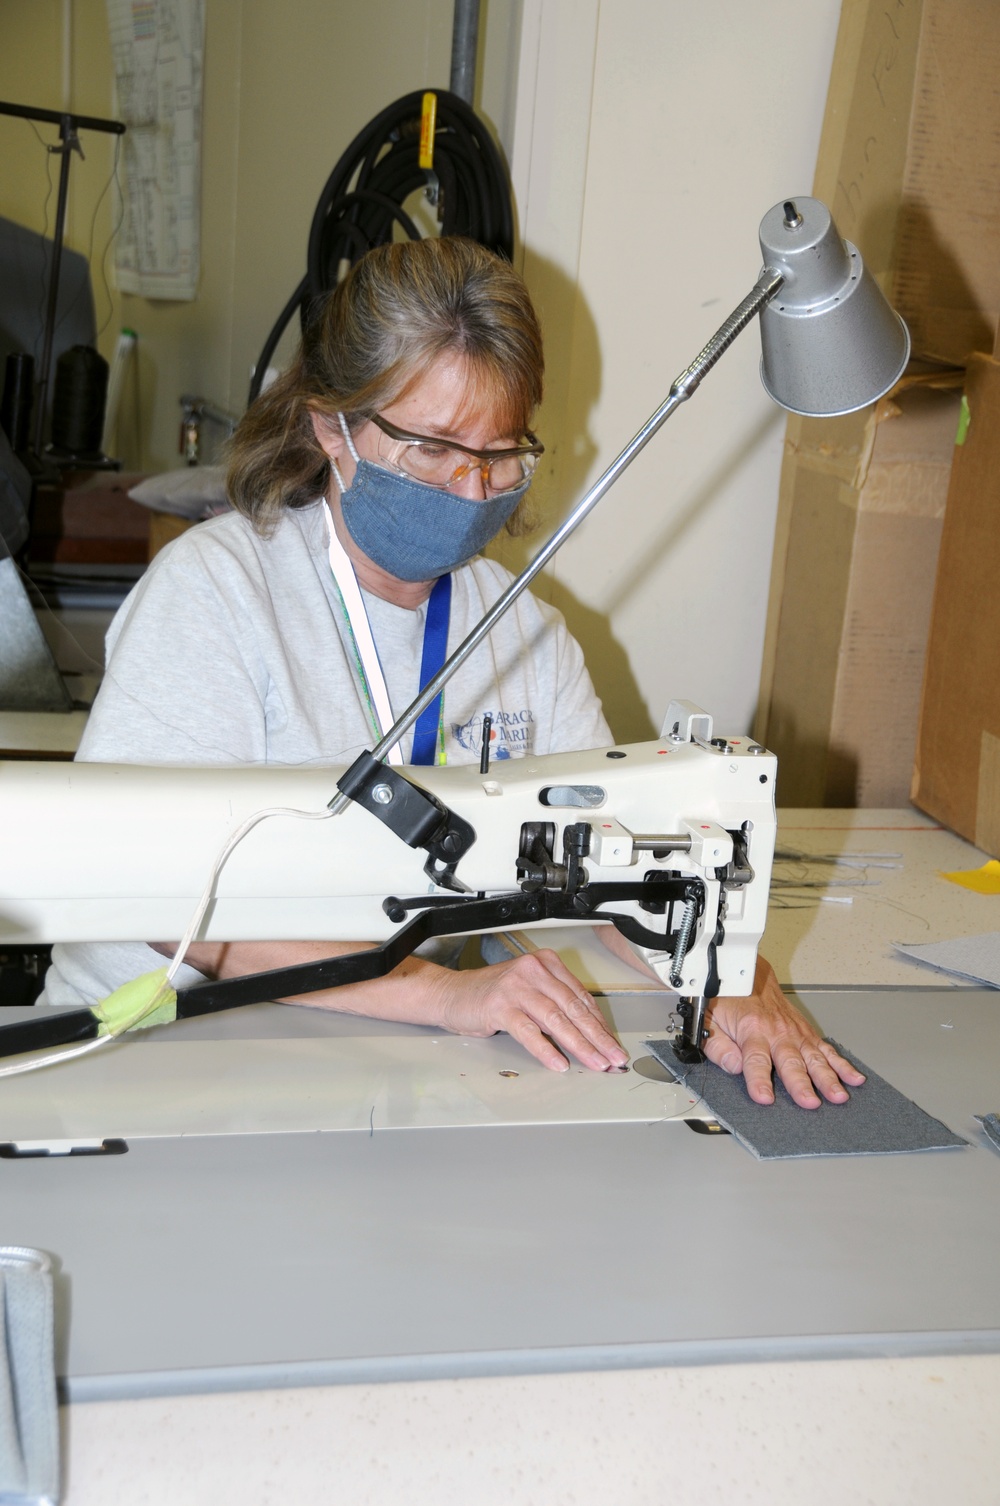 FRCE manufactures cloth face coverings for employees